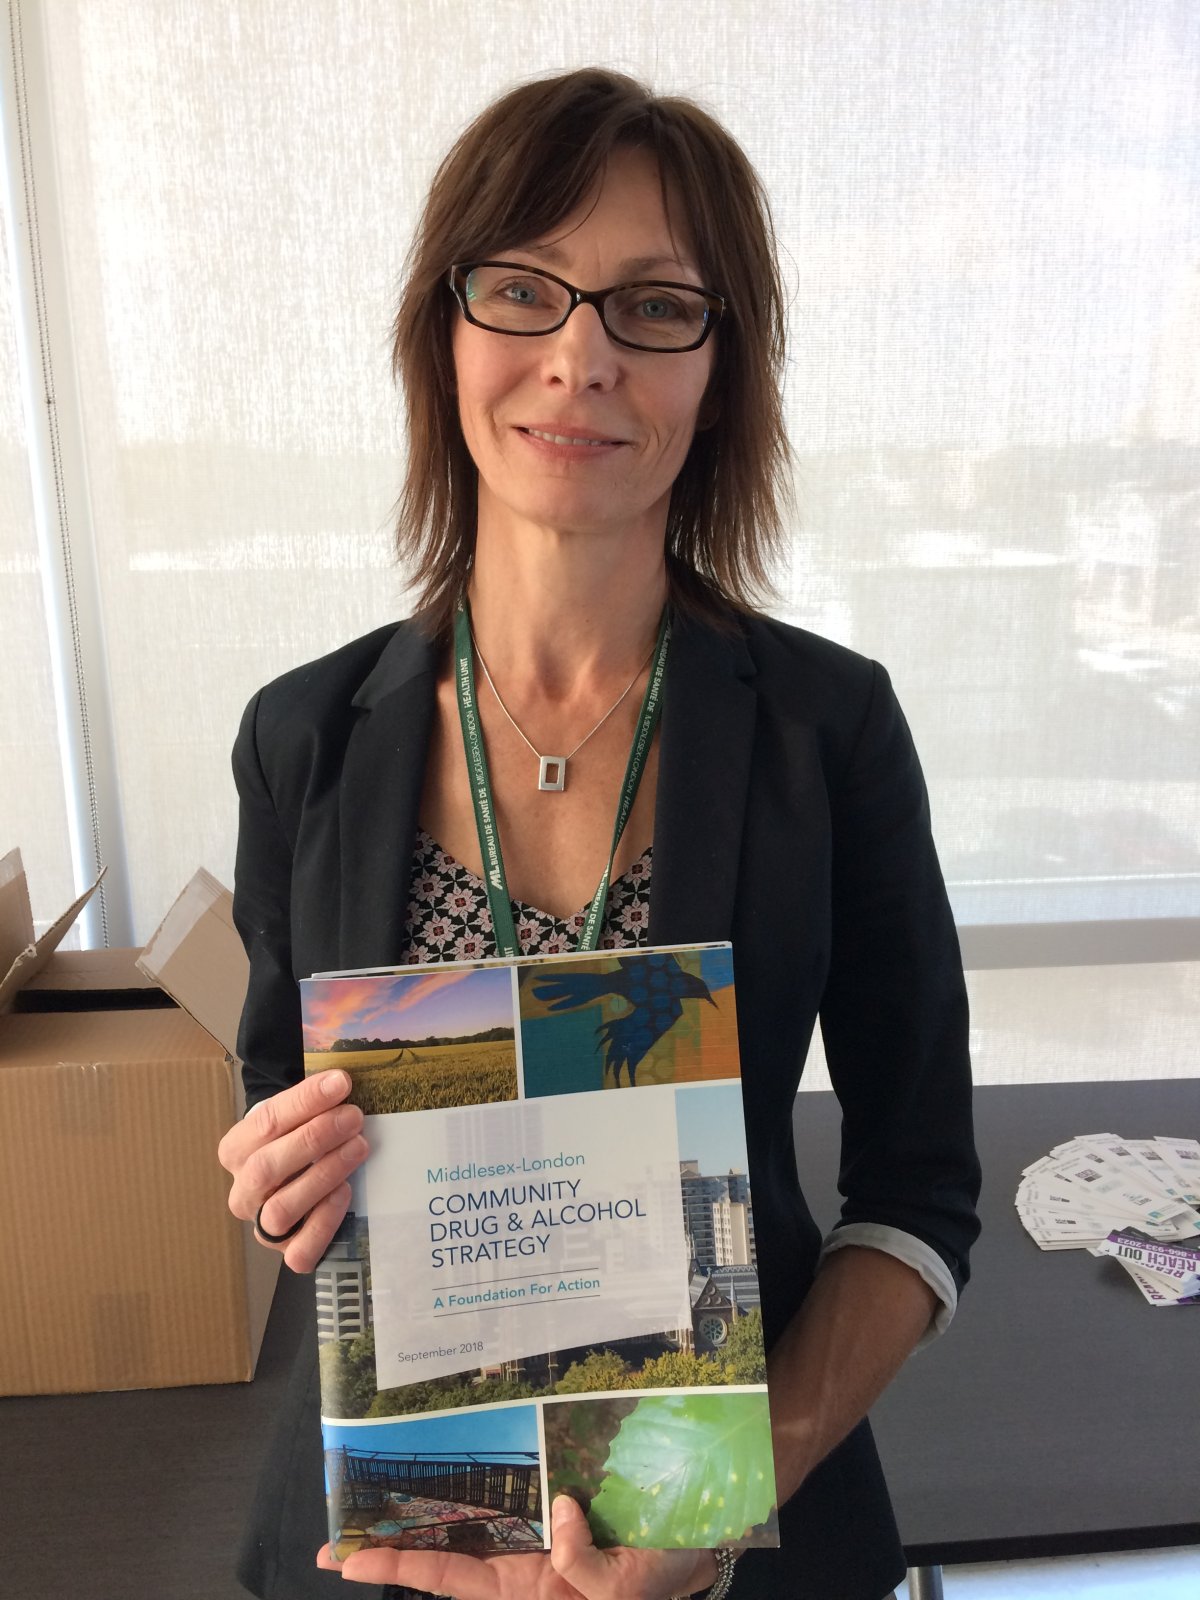 Co-chair of the CDAS steering committee Rhonda Brittan displays "The Middlesex-London Community Drug & Alcohol Strategy: A Foundation For Action" report, released Tuesday, Oct. 16, 2018 at Goodwill Industries on Horton Street in London. 